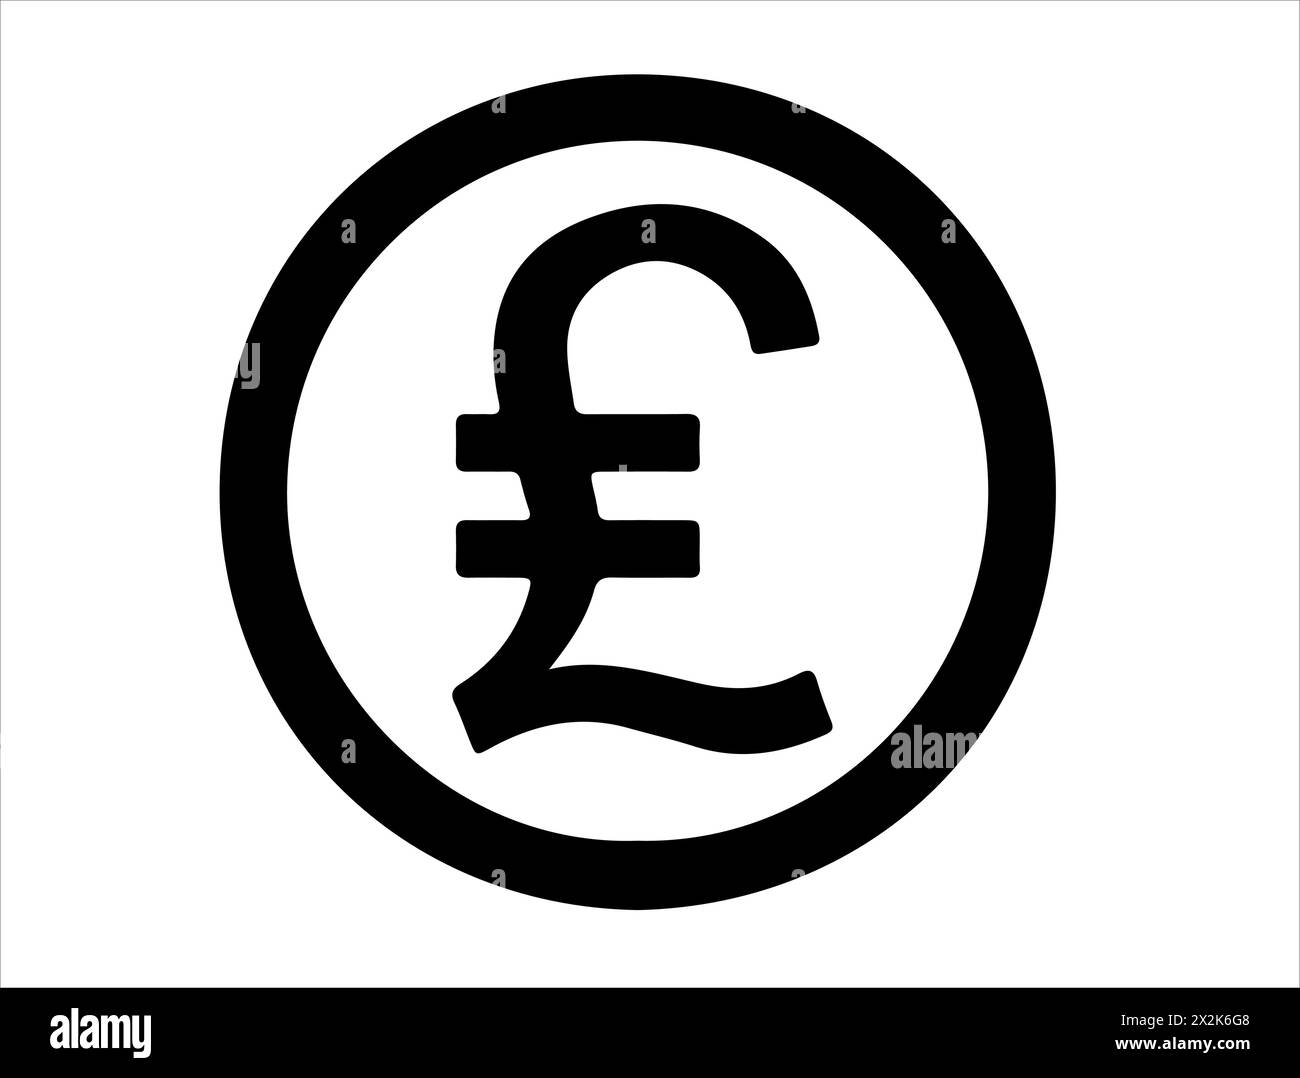 Italy lira currency sign silhouette Stock Vector